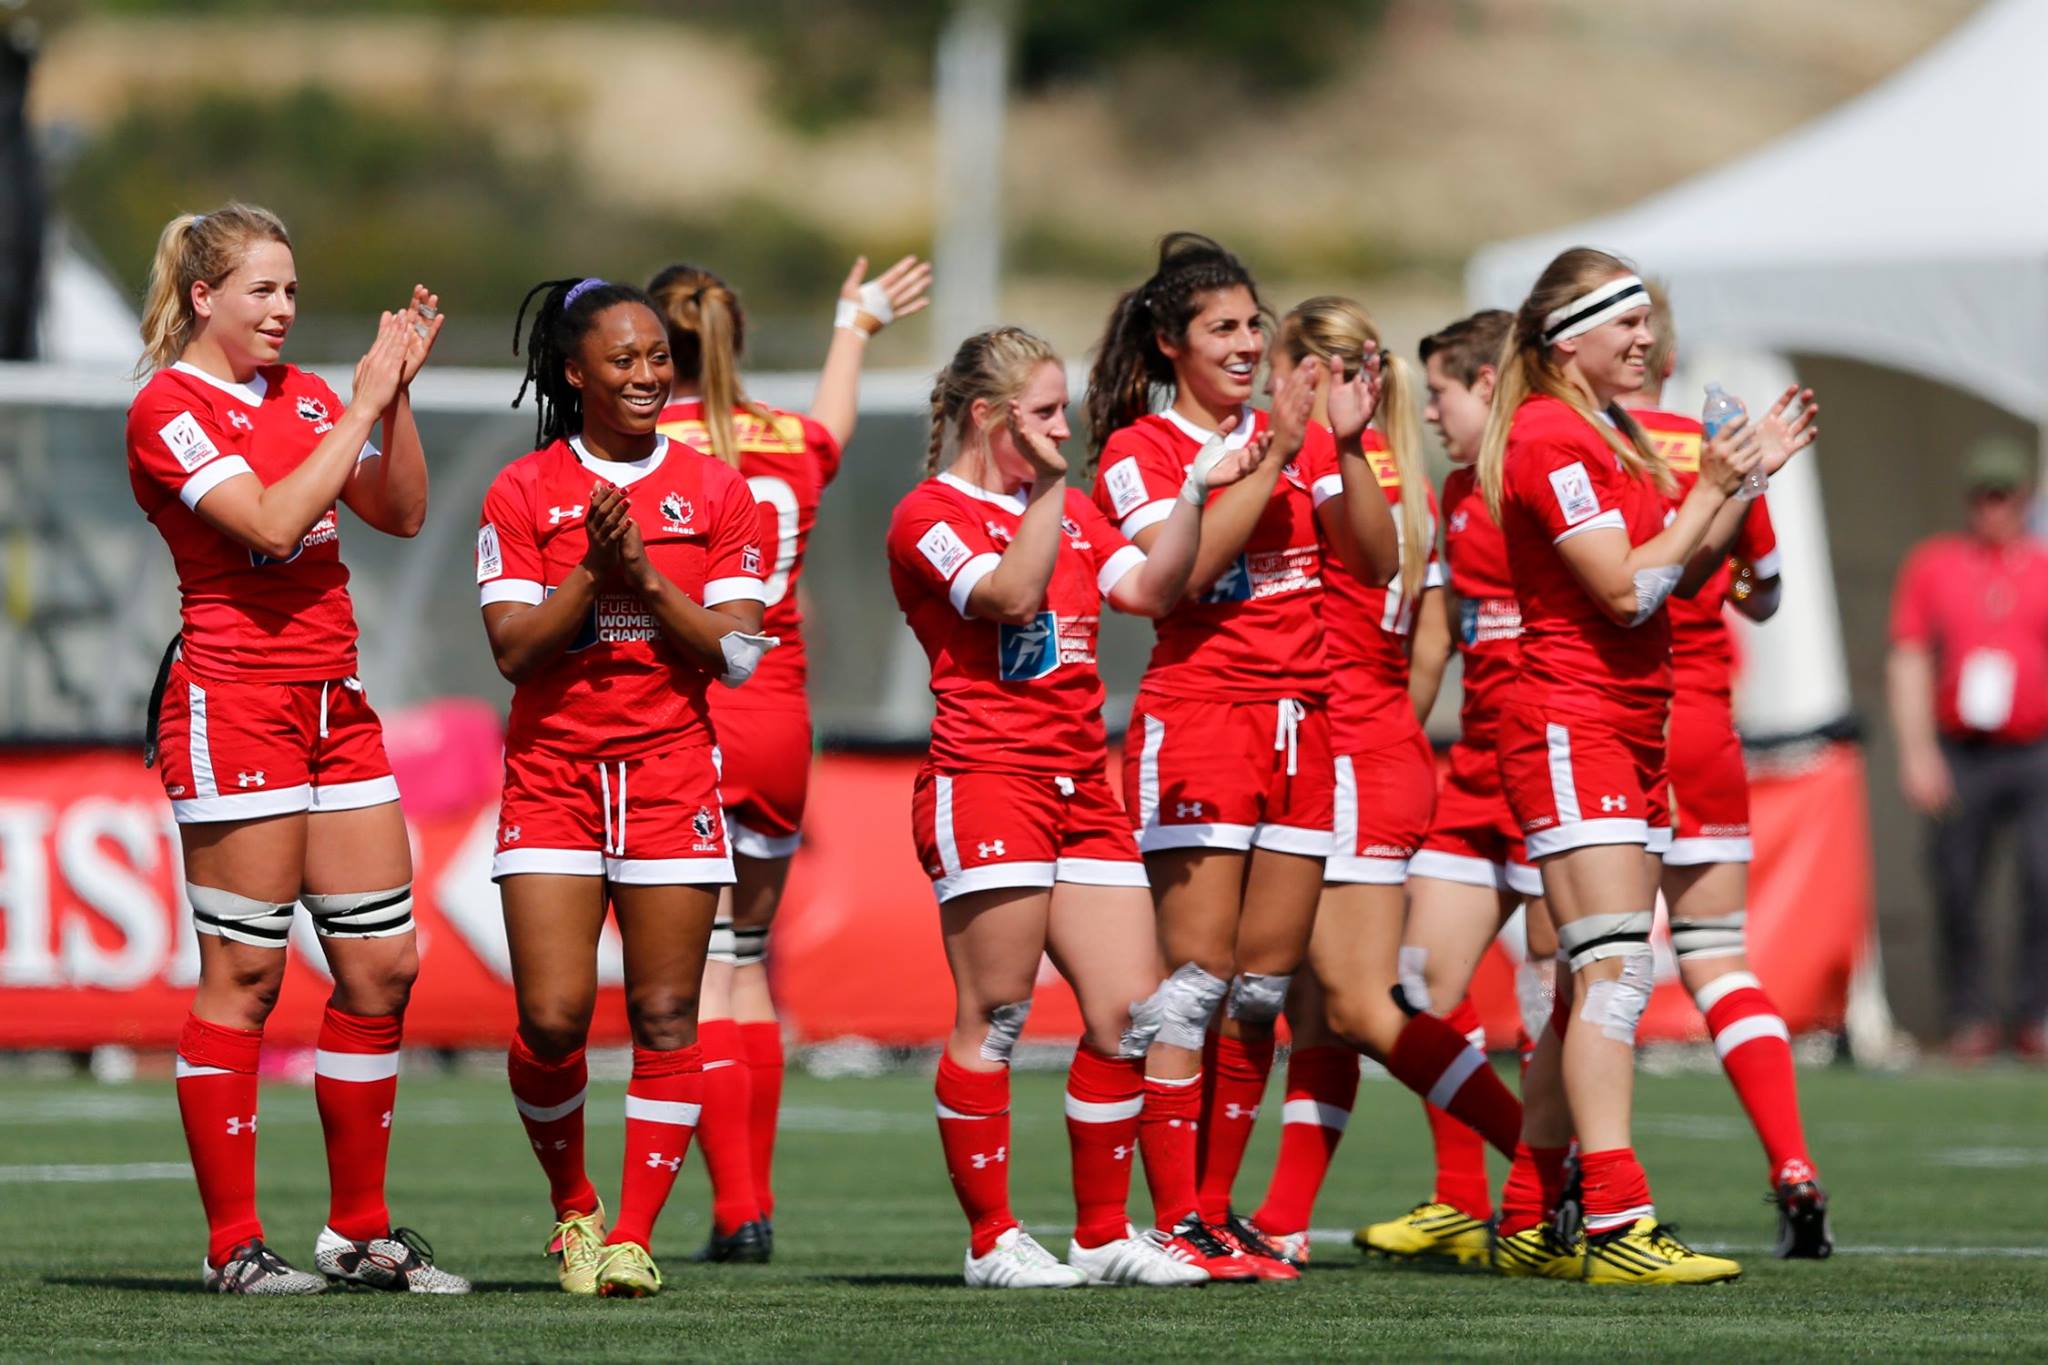 The Canadian women's rugby sevens squad thank the crowd following their last match at Canada 7s in Langford, BC (Photo: World Rugby).